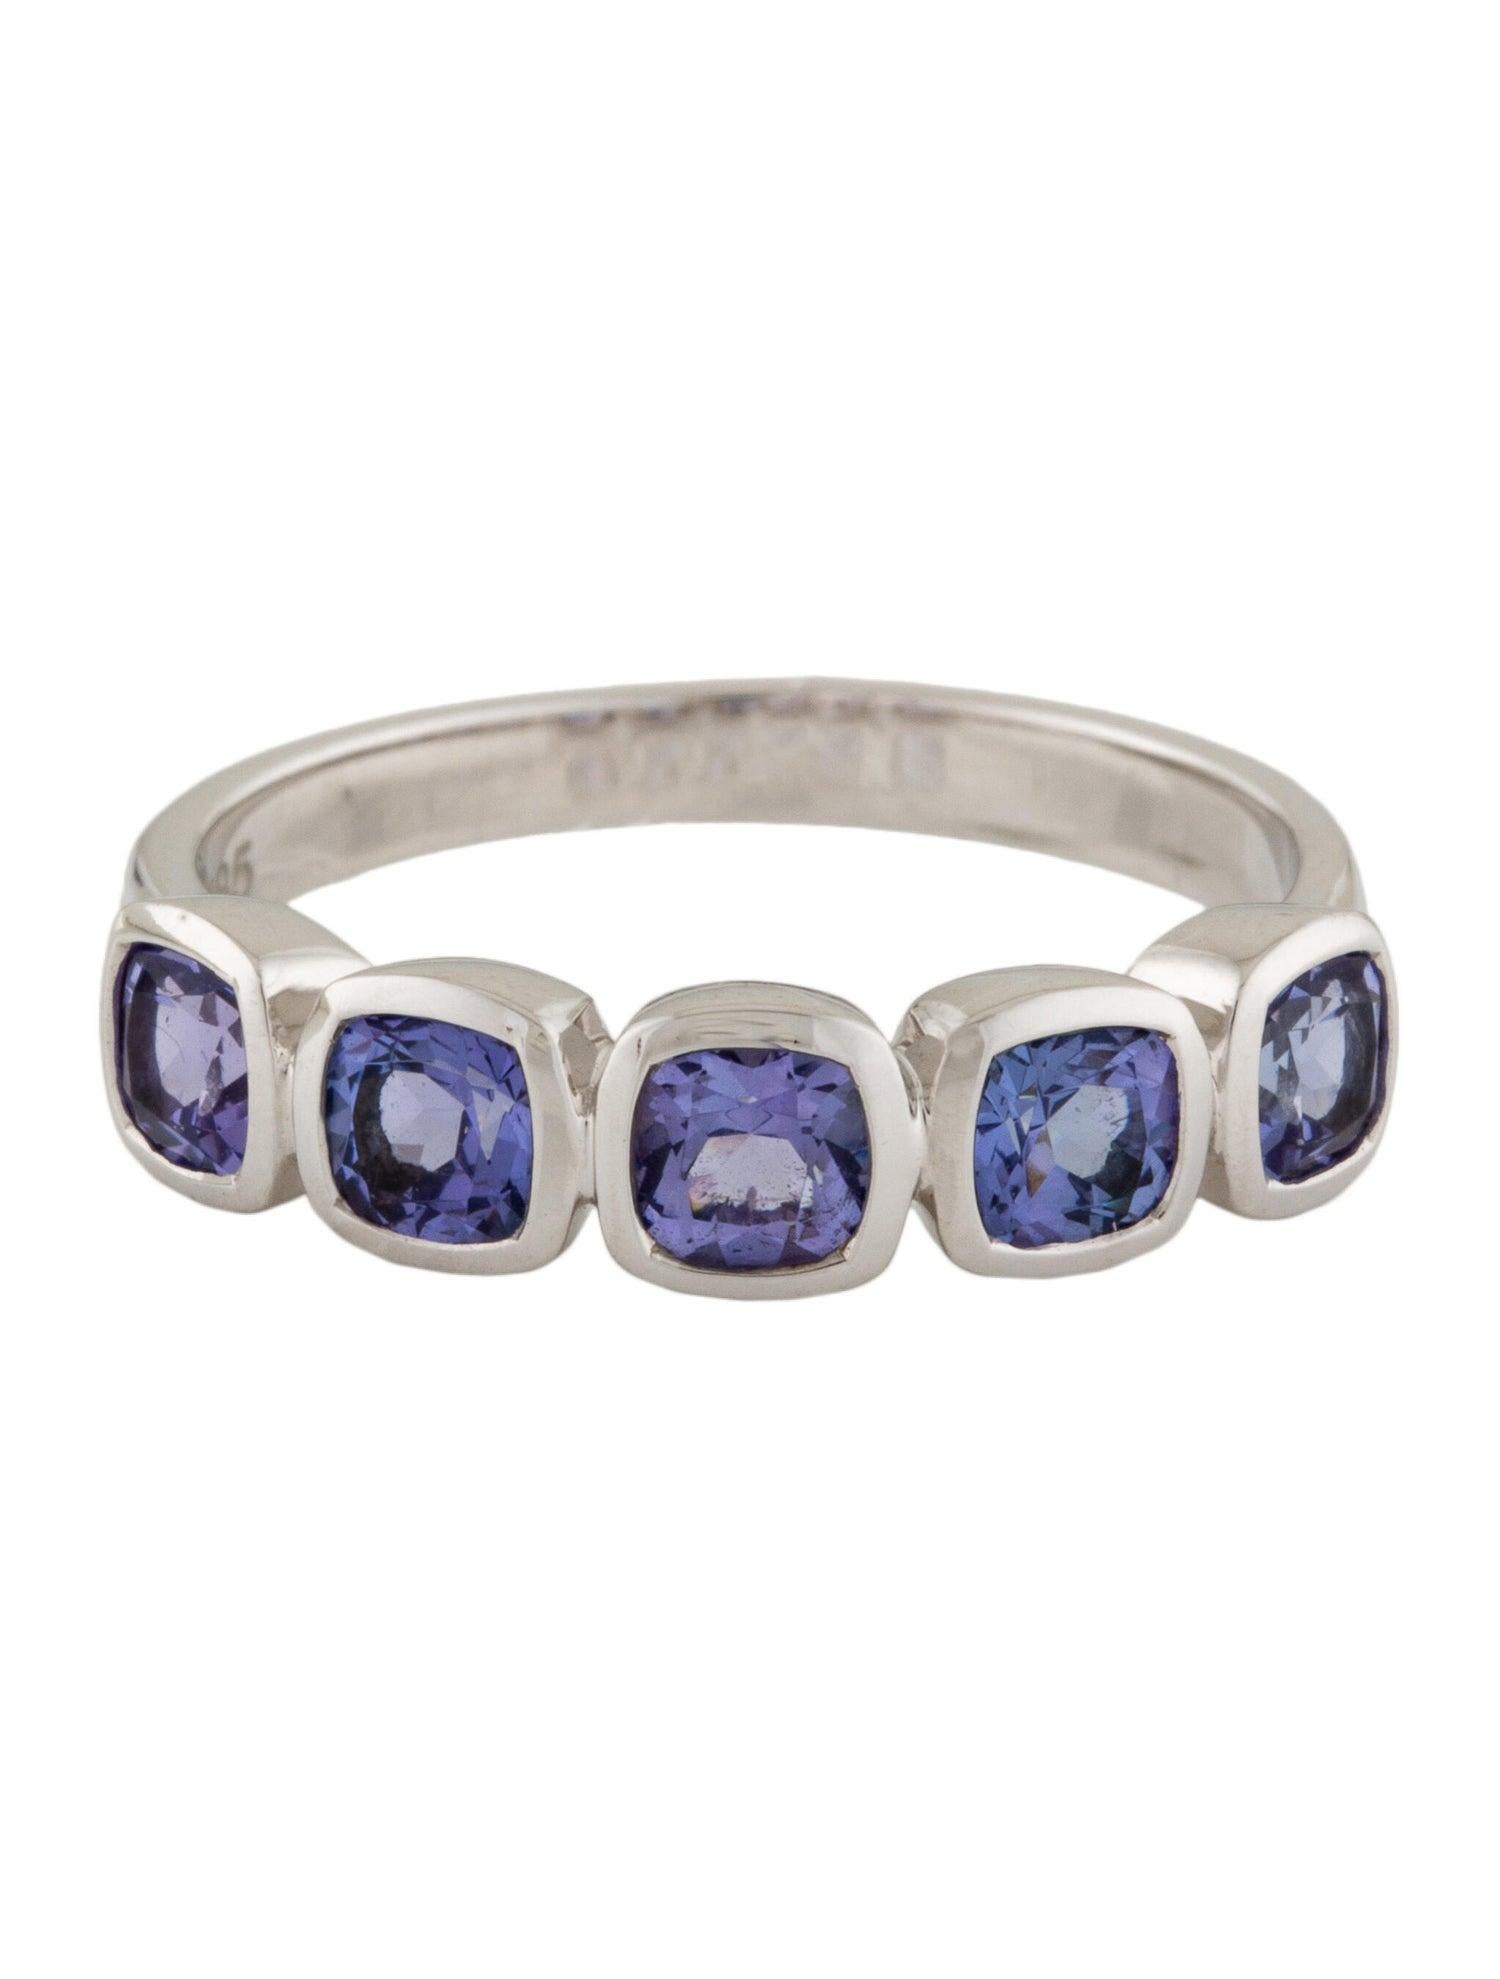 Discover the allure of this exquisite Rhodium-Plated 14K White Gold Tanzanite Band. Meticulously crafted, this stunning ring features a remarkable 1.50 carat tanzanite gemstone in a cushion brilliant cut, elegantly set in rhodium-plated 14K white